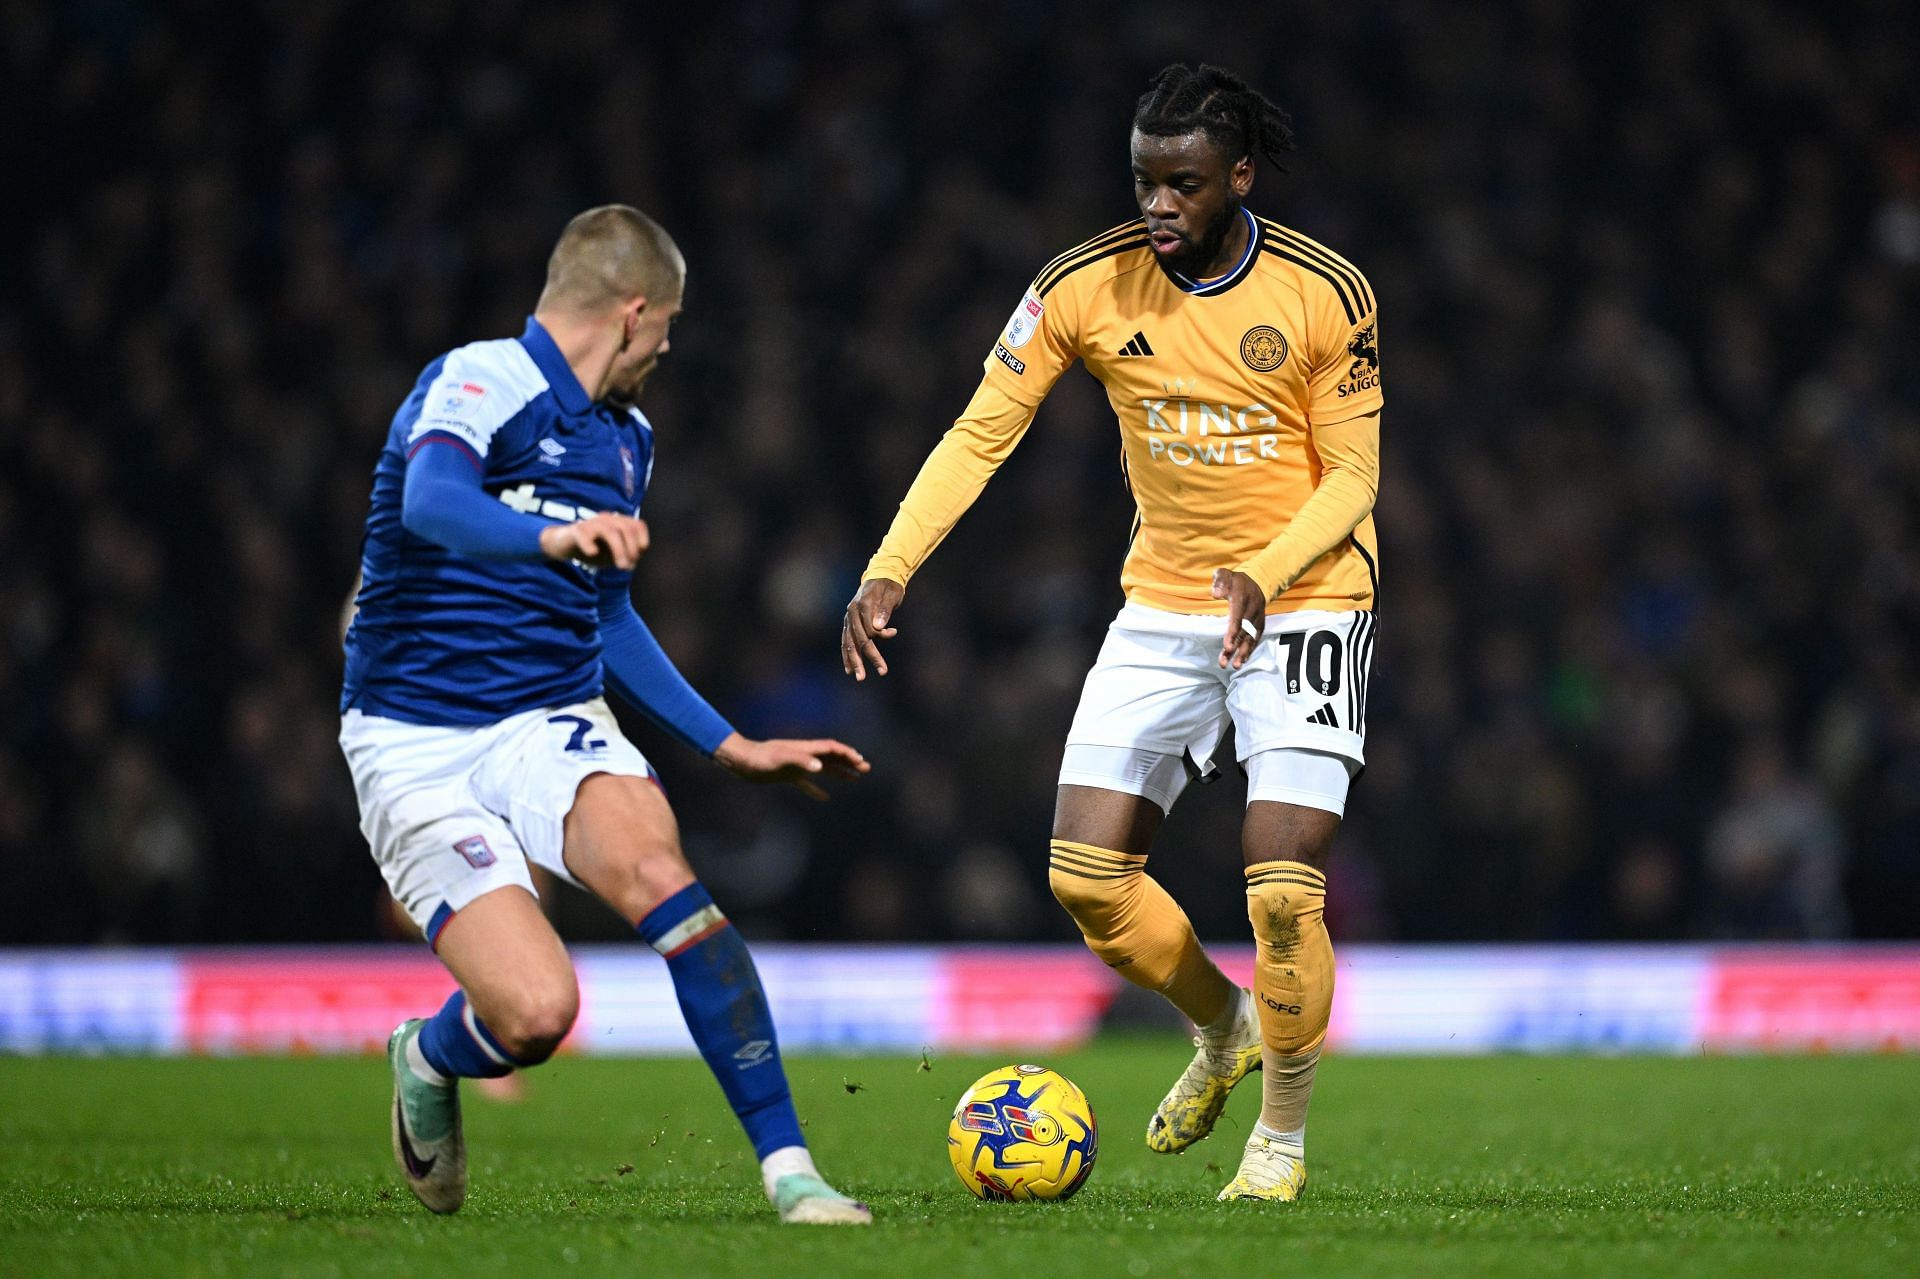 Ipswich Town v Leicester City - Sky Bet Championship